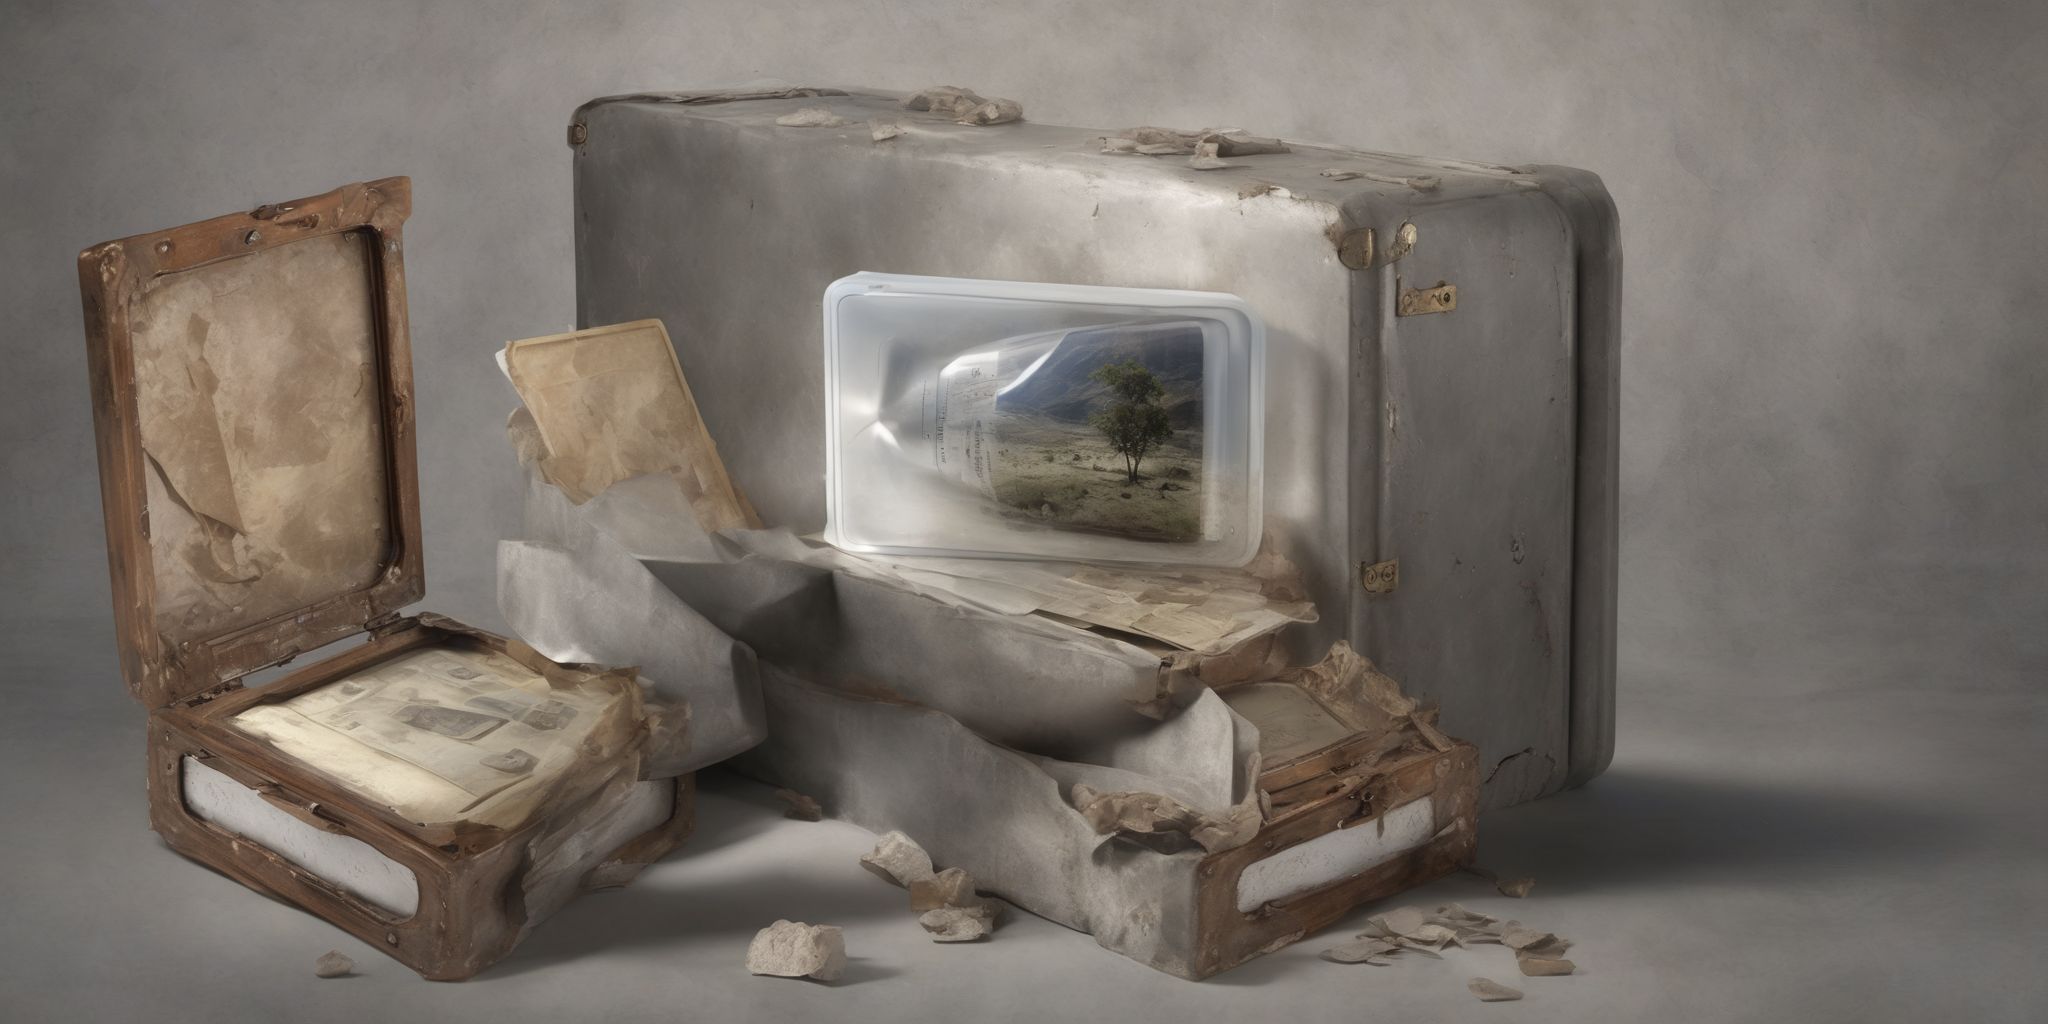 Time capsule  in realistic, photographic style